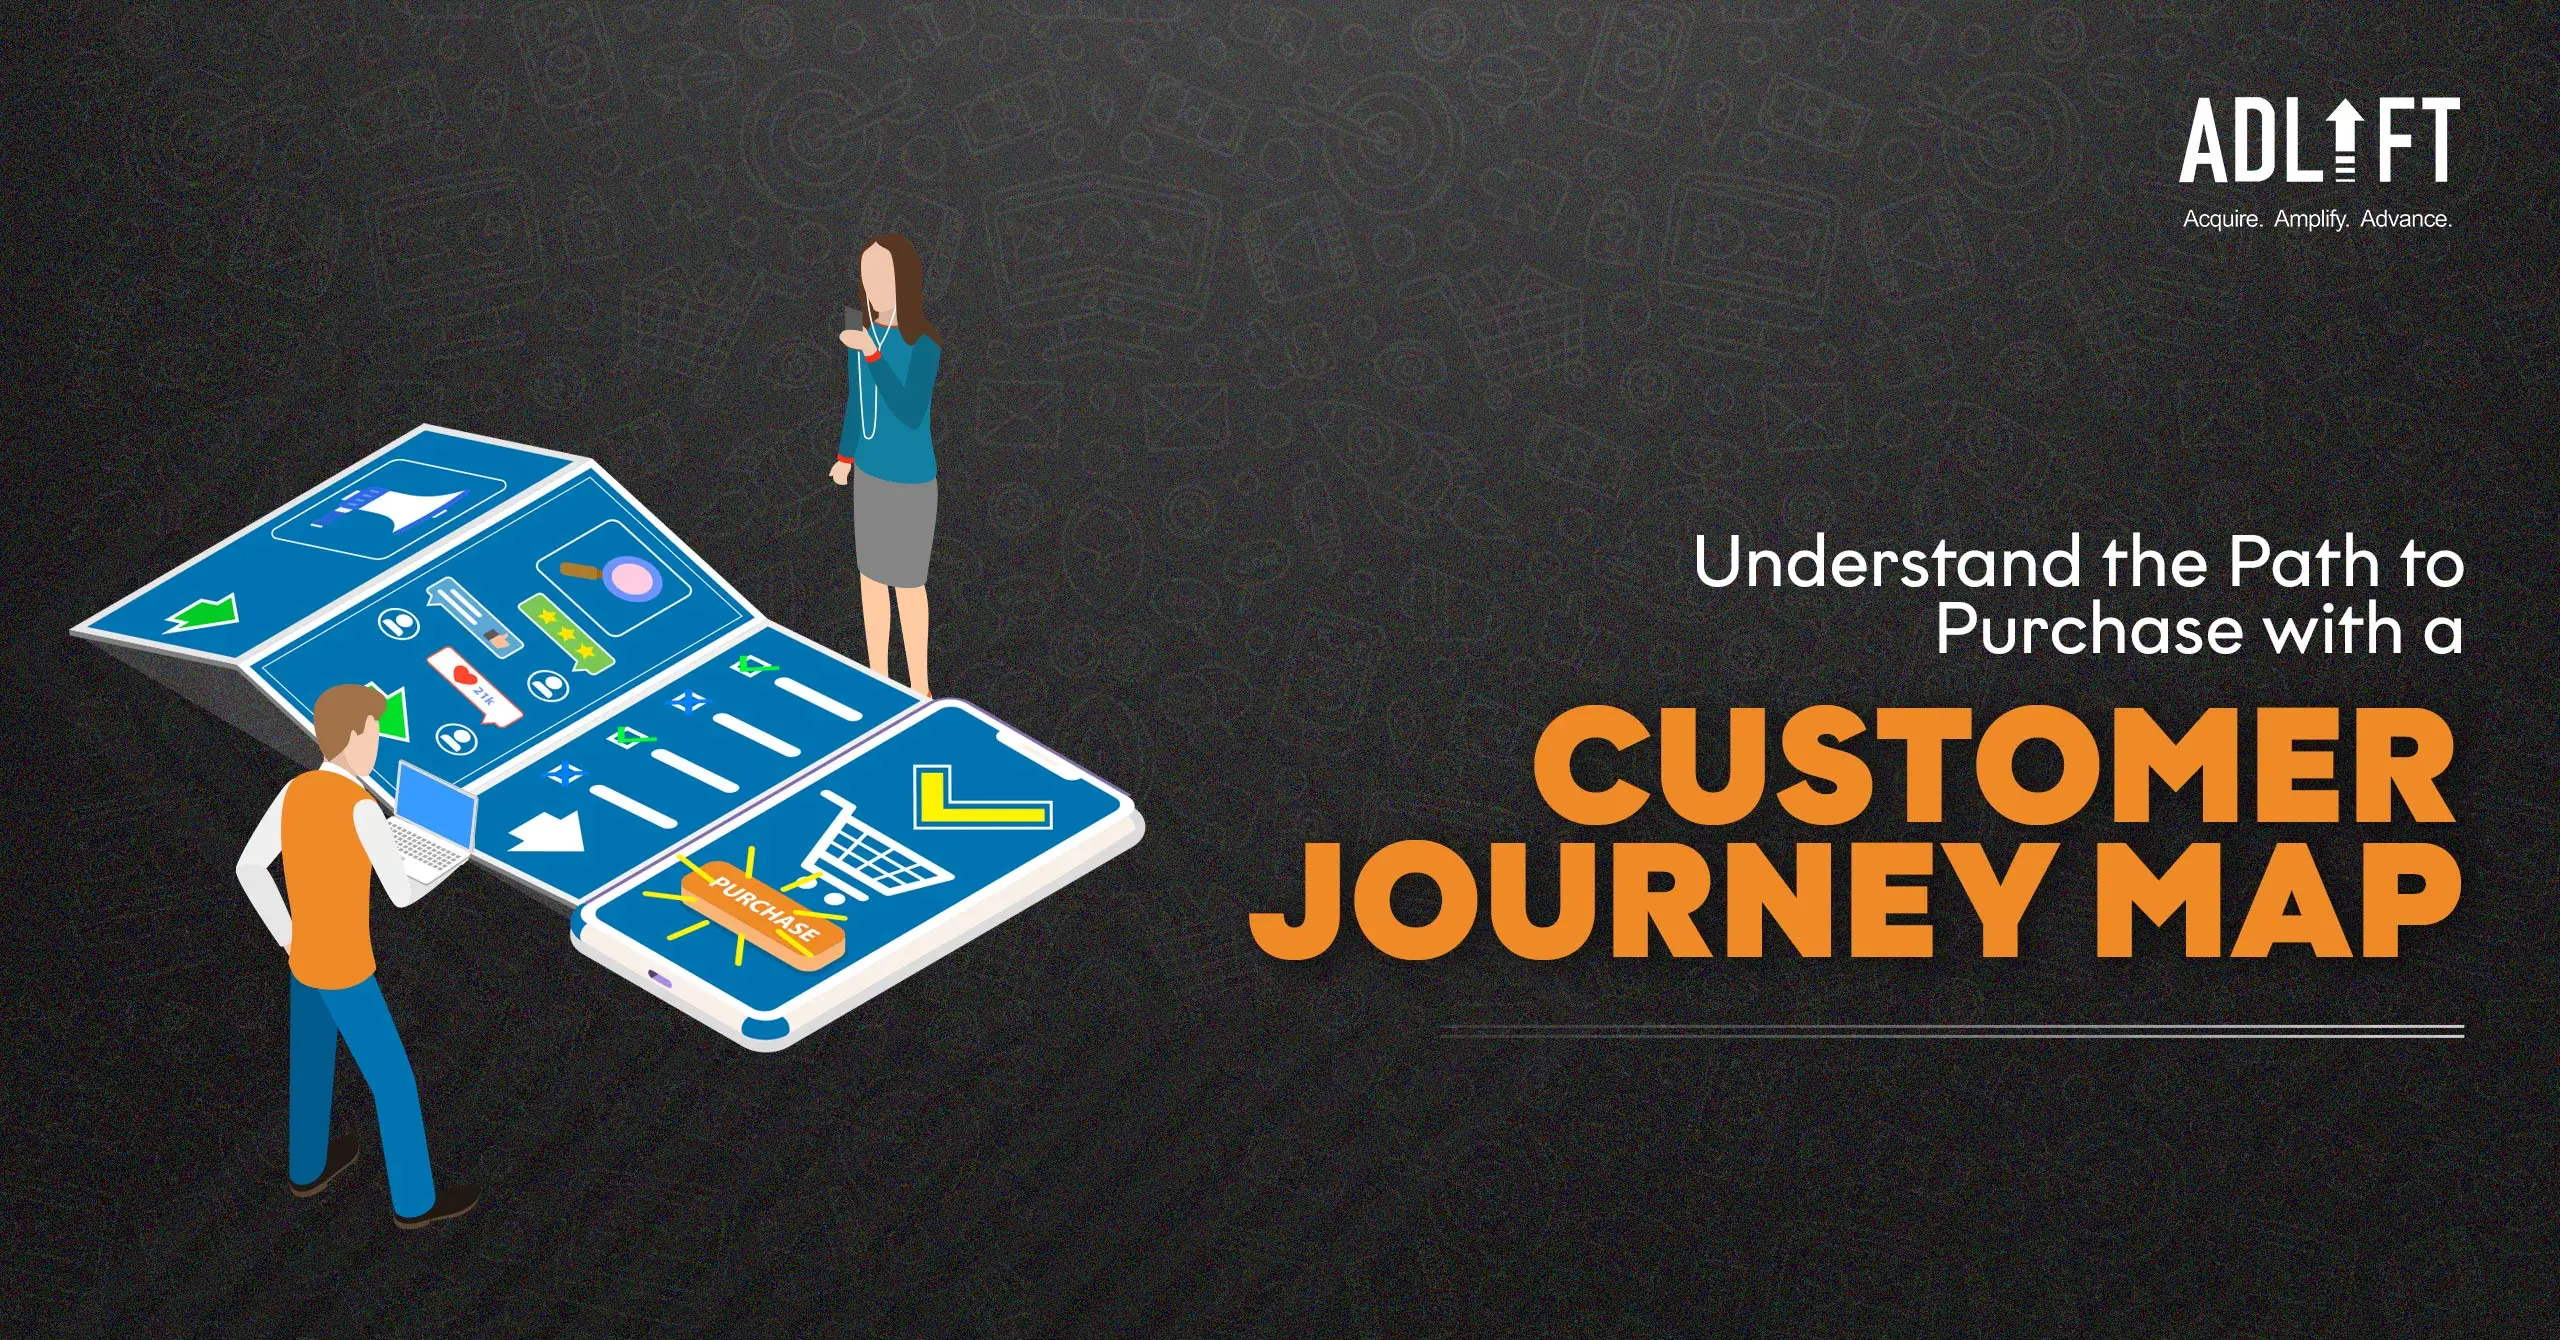 Understand the Path to Purchase with a Customer Journey Map